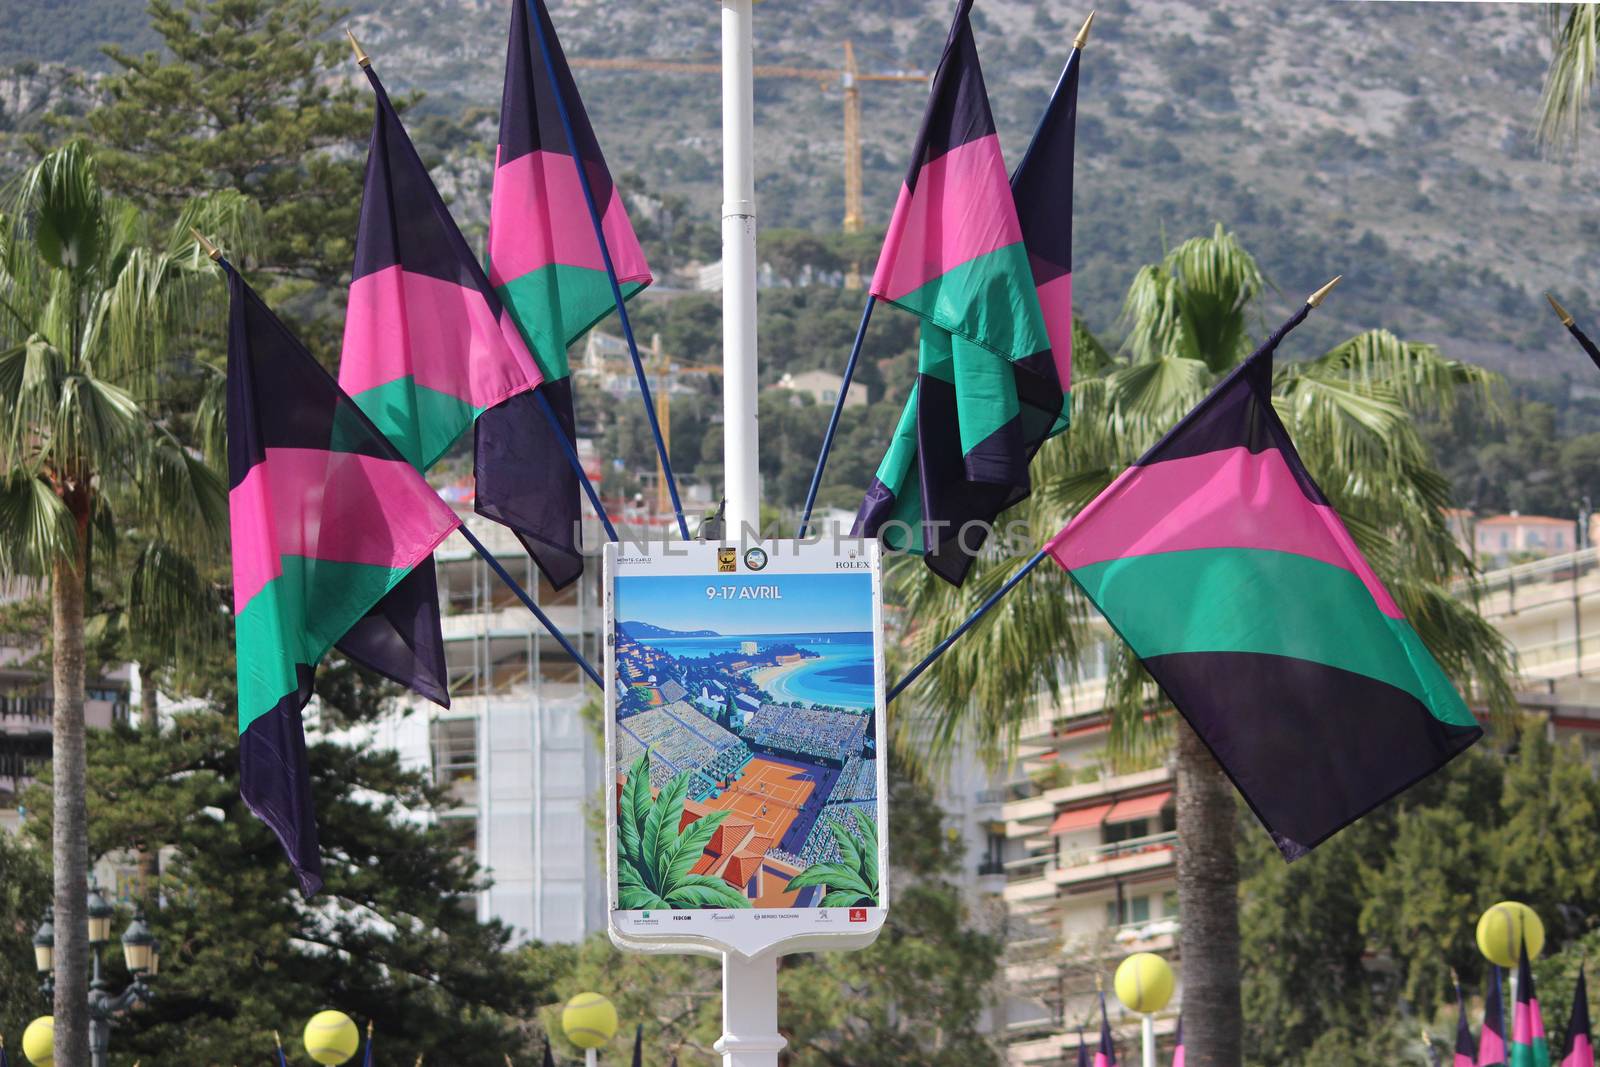 Monte-Carlo, Monaco - April 6, 2016: Poster and Flags for the Monte-Carlo Rolex Masters 2016 in Monte Carlo, Monaco